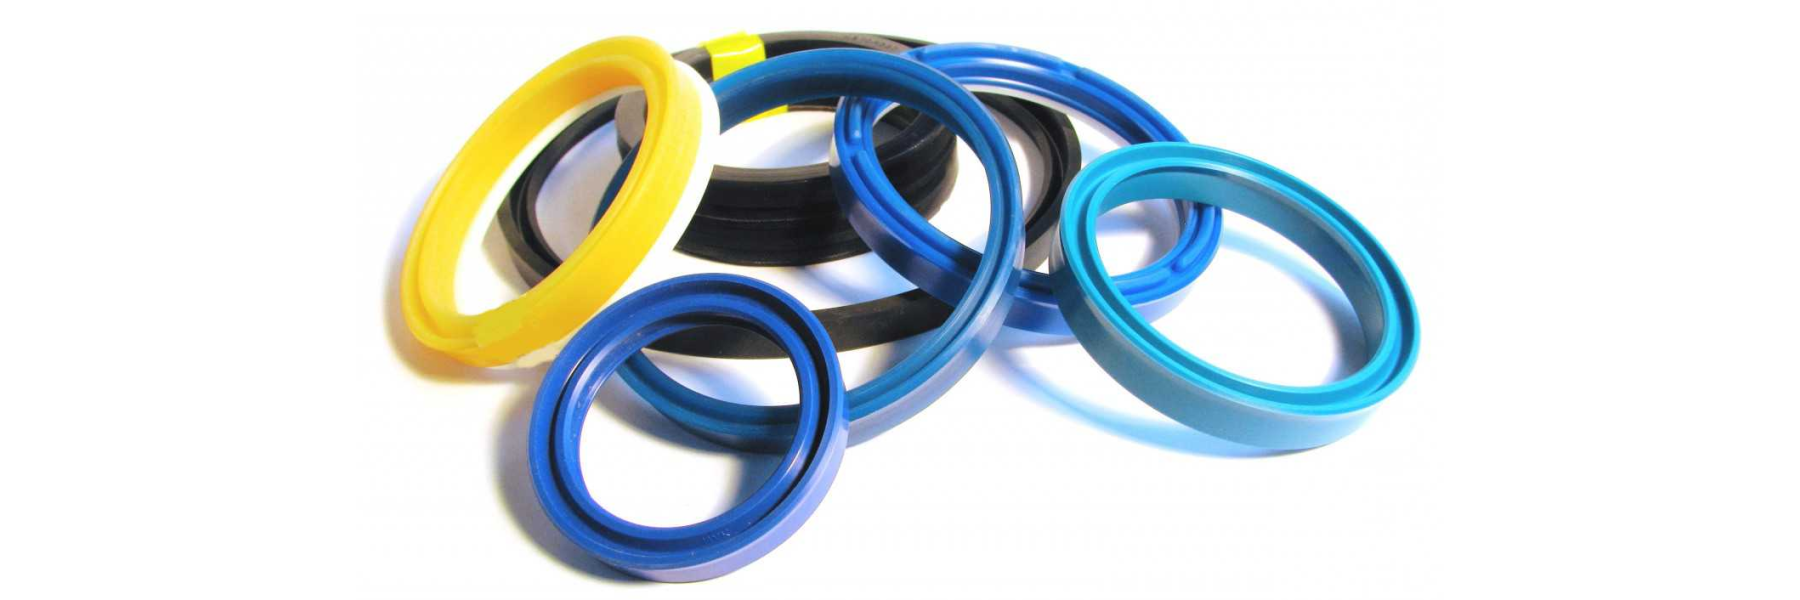 OEM GASKET SETS FOR HYDRAULIC CYLINDERS AND...